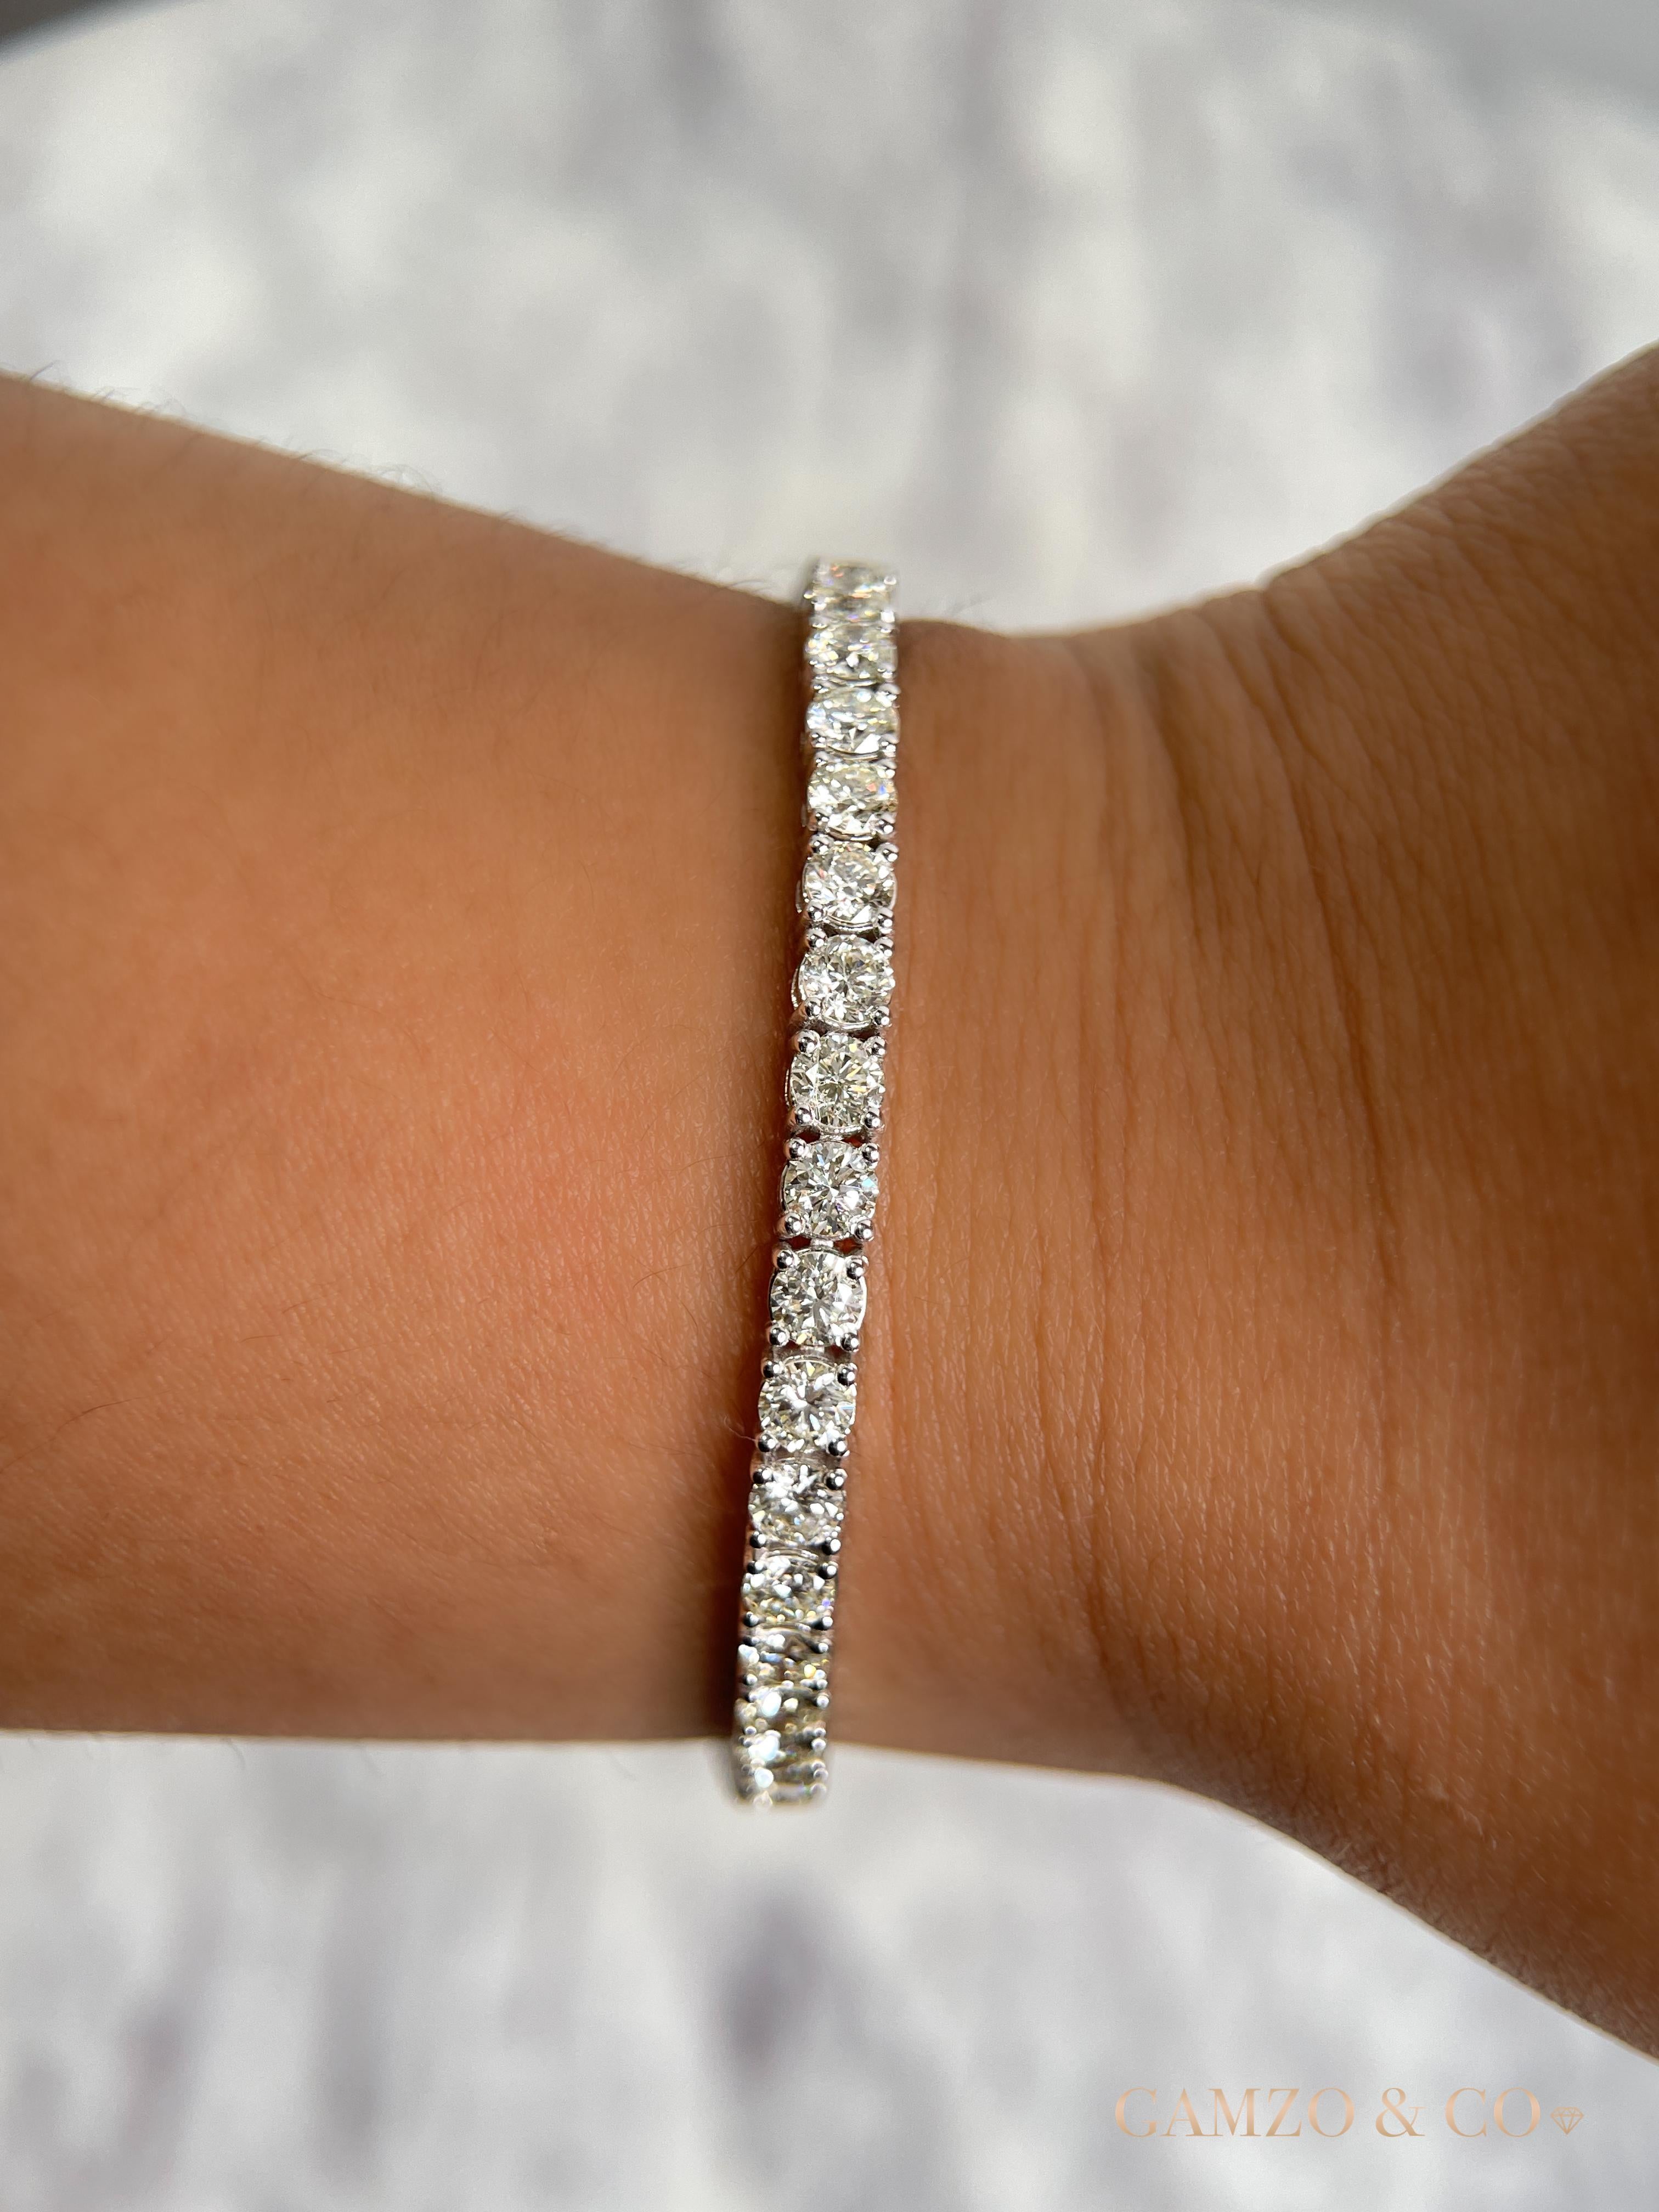 This diamond tennis bracelet features beautifully cut round diamonds set gorgeously in 14k gold.

Metal: 14k Gold
Diamond Cut: Round Natural Diamond 
Total Diamond Carats: 7ct
Diamond Clarity: VS
Diamond Color: F-G
Color: Rose Gold
Bracelet Length: